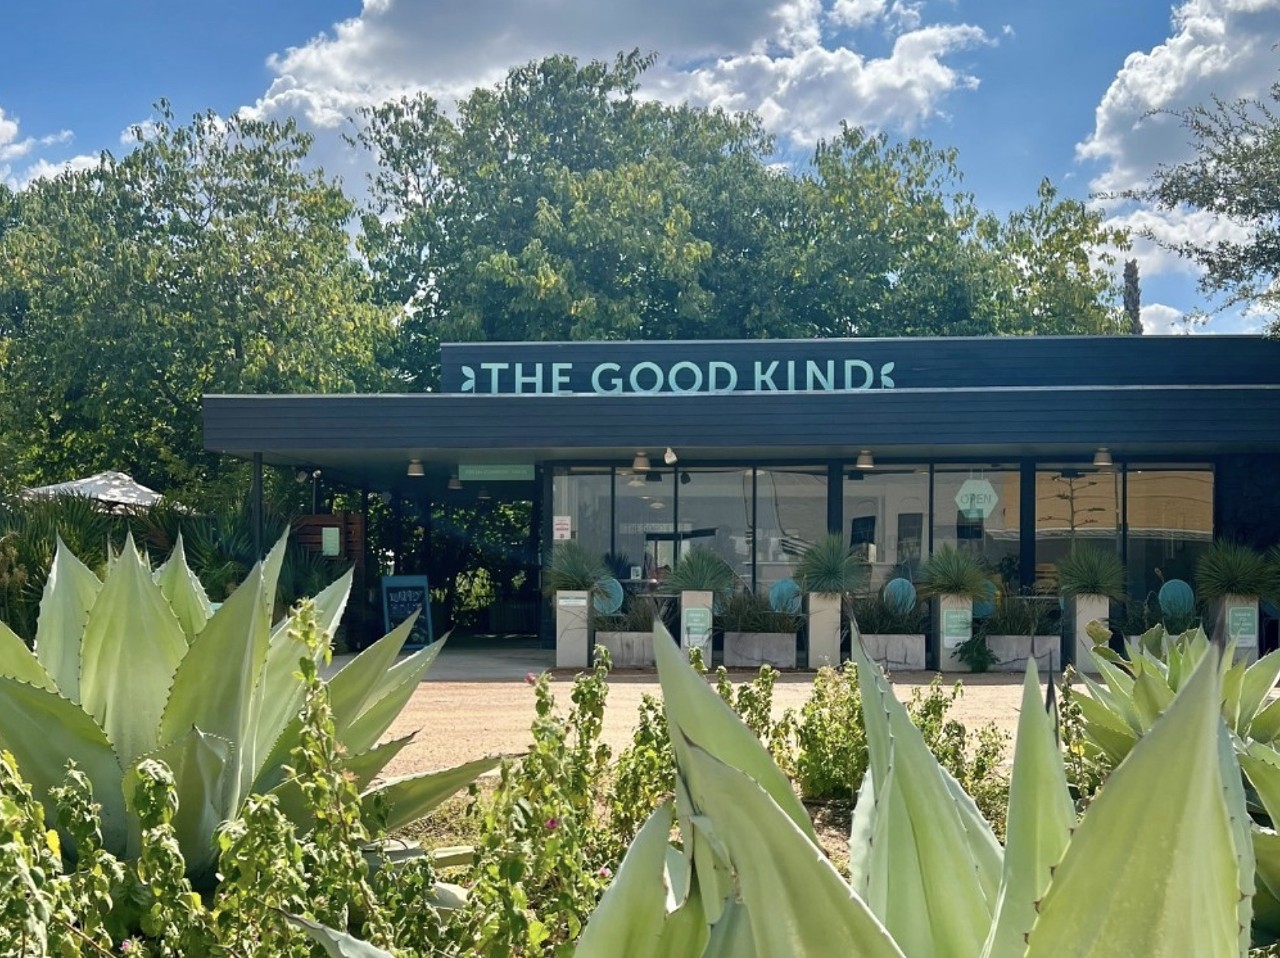 The Good Kind
1127 S. St. Mary's St., (210) 801-5892, eatgoodkind.com
Start the day in the garden on The Good Kind’s spacious outdoor patio with a mimosa or a coffee and some fresh comfort food. They don’t call it a Good Morning Bowl for nothing! A free range local egg, black beans, aged white cheddar, sweet potato, spinach, grilled corn, sour cream, salsa and guacamole make this a protein and veggie-packed way to kick off the day.